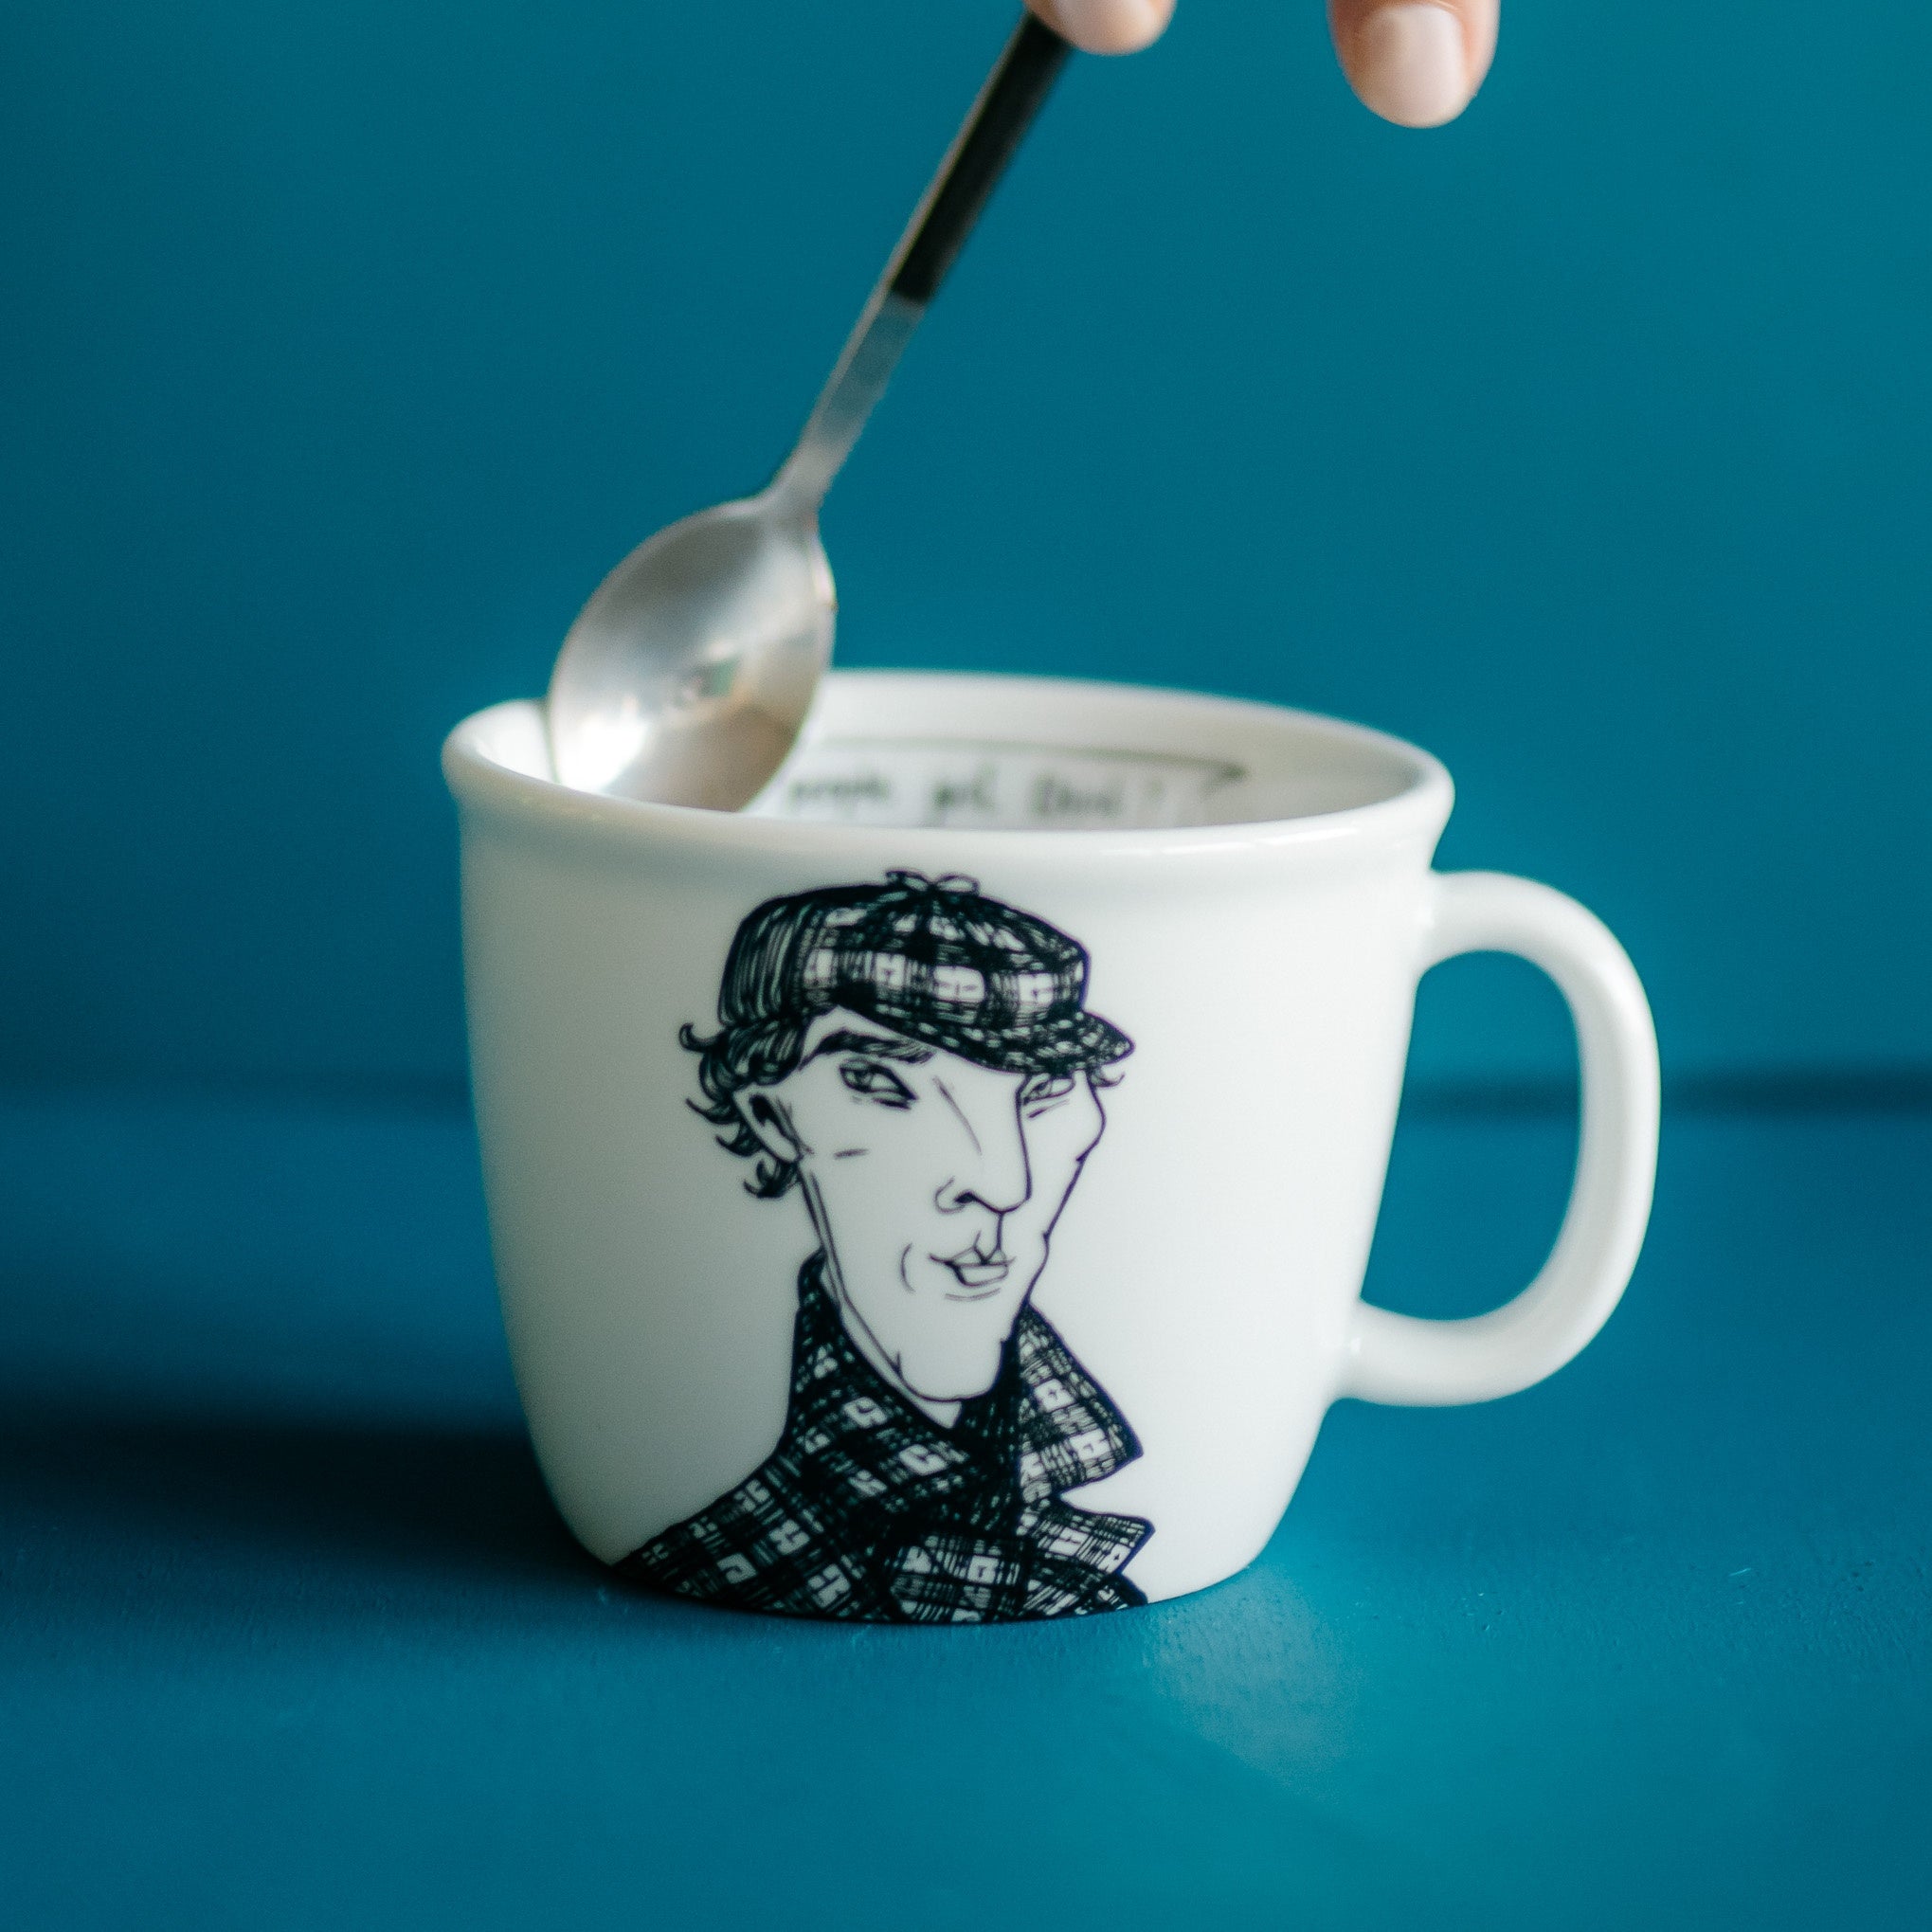 Porcelain cup inspired by Sherlock Holmes with a spoon